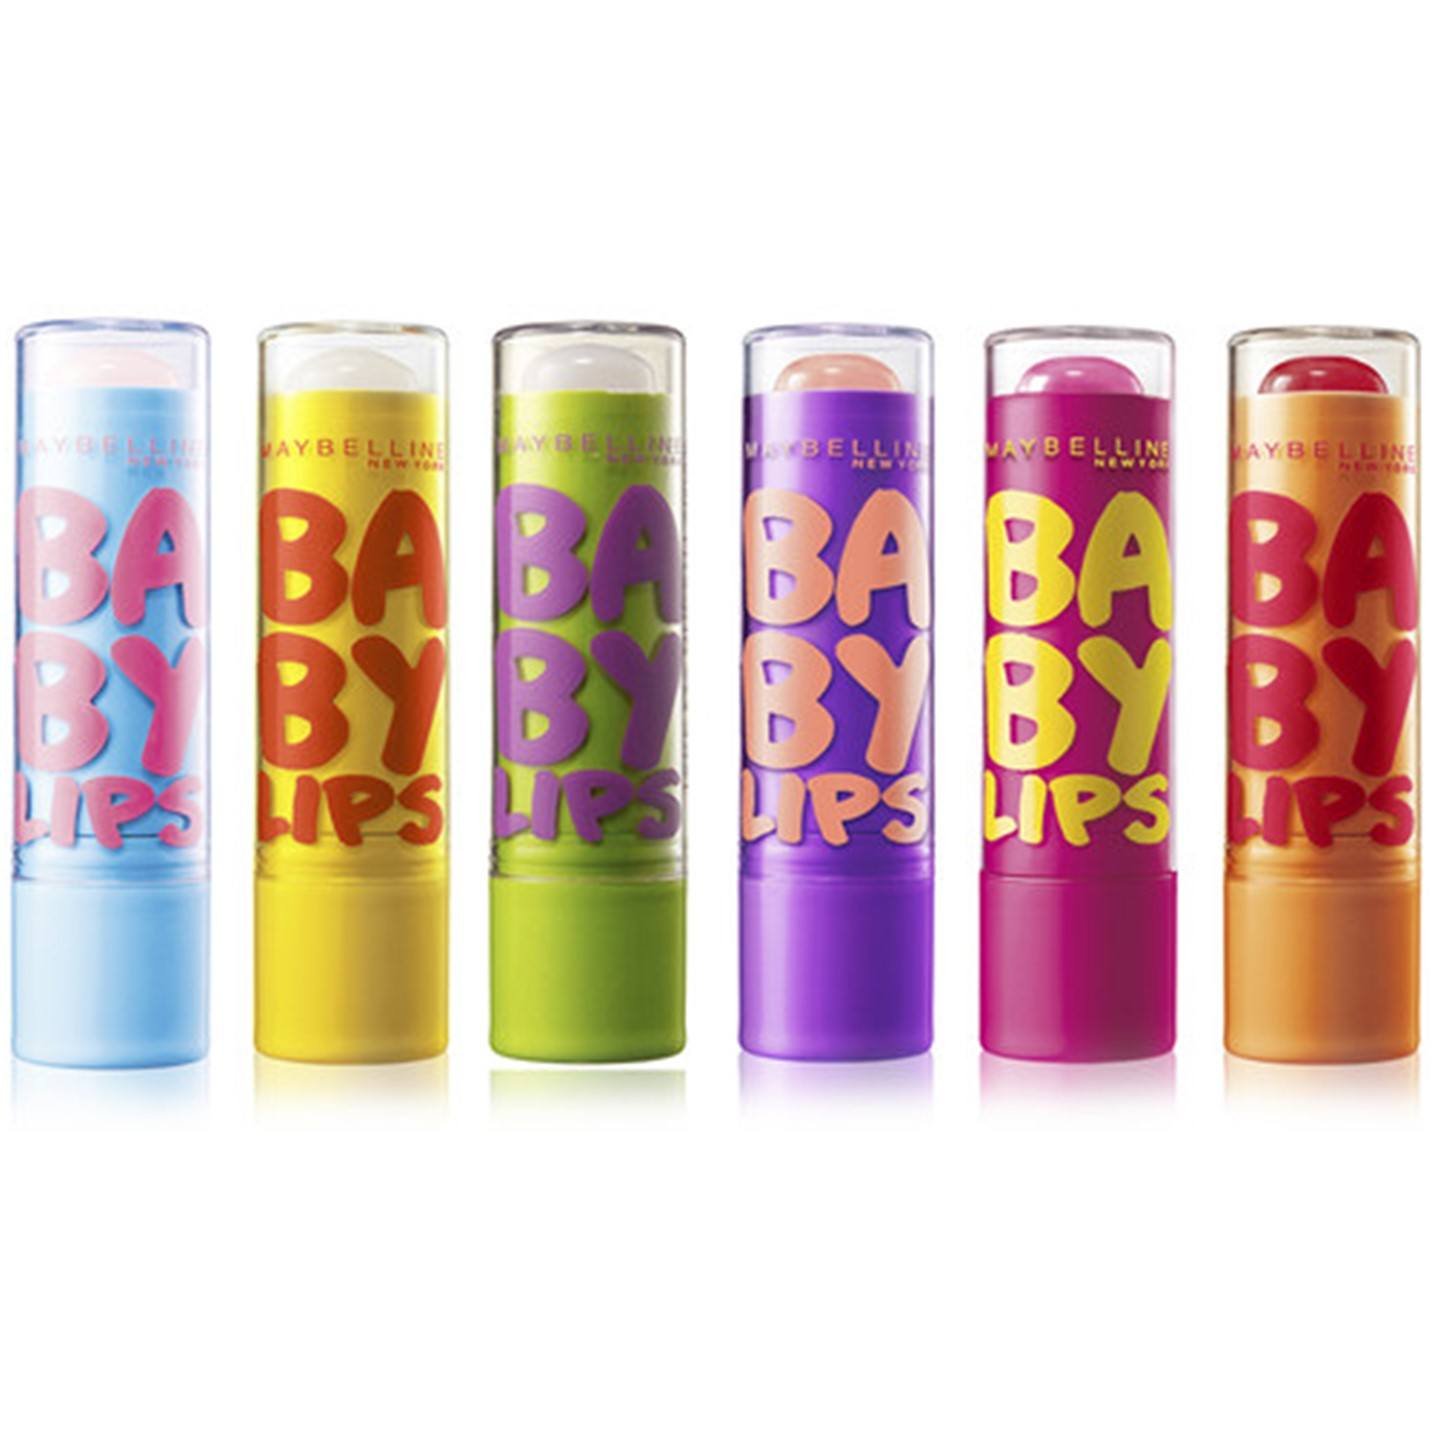 baby lips natural content full image width 1x1